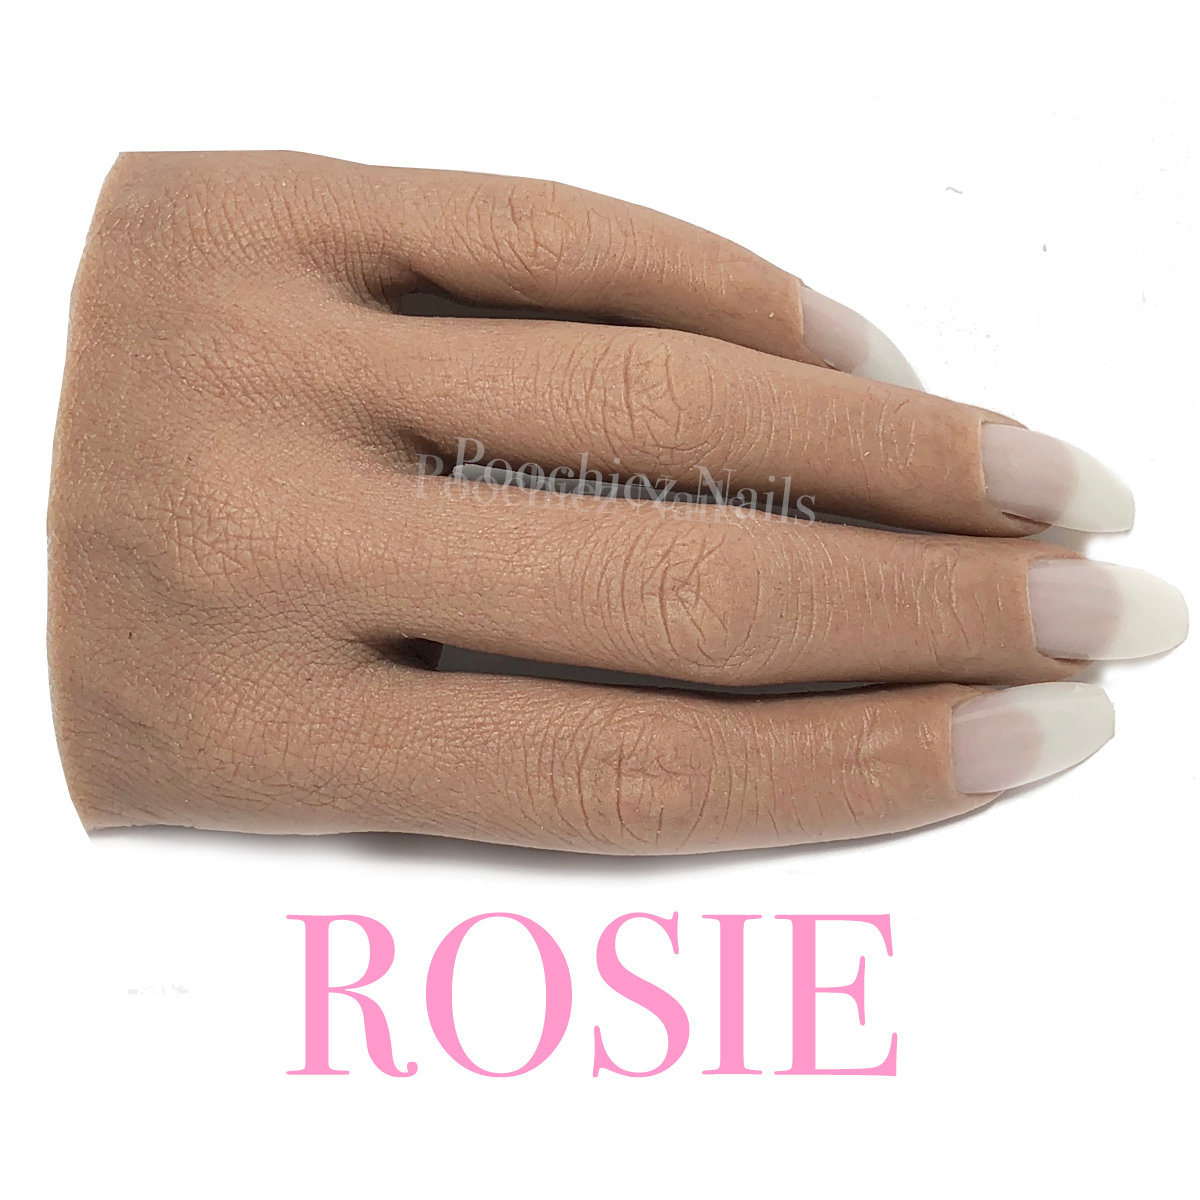 ROSIE HALF REALISTIC PRACTICE HAND ( PLEASE READ THE DIRECTIONS & WATCH THE VIDEOS BELOW) WILL TAKE 5-8 DAYS TO PROCESS.